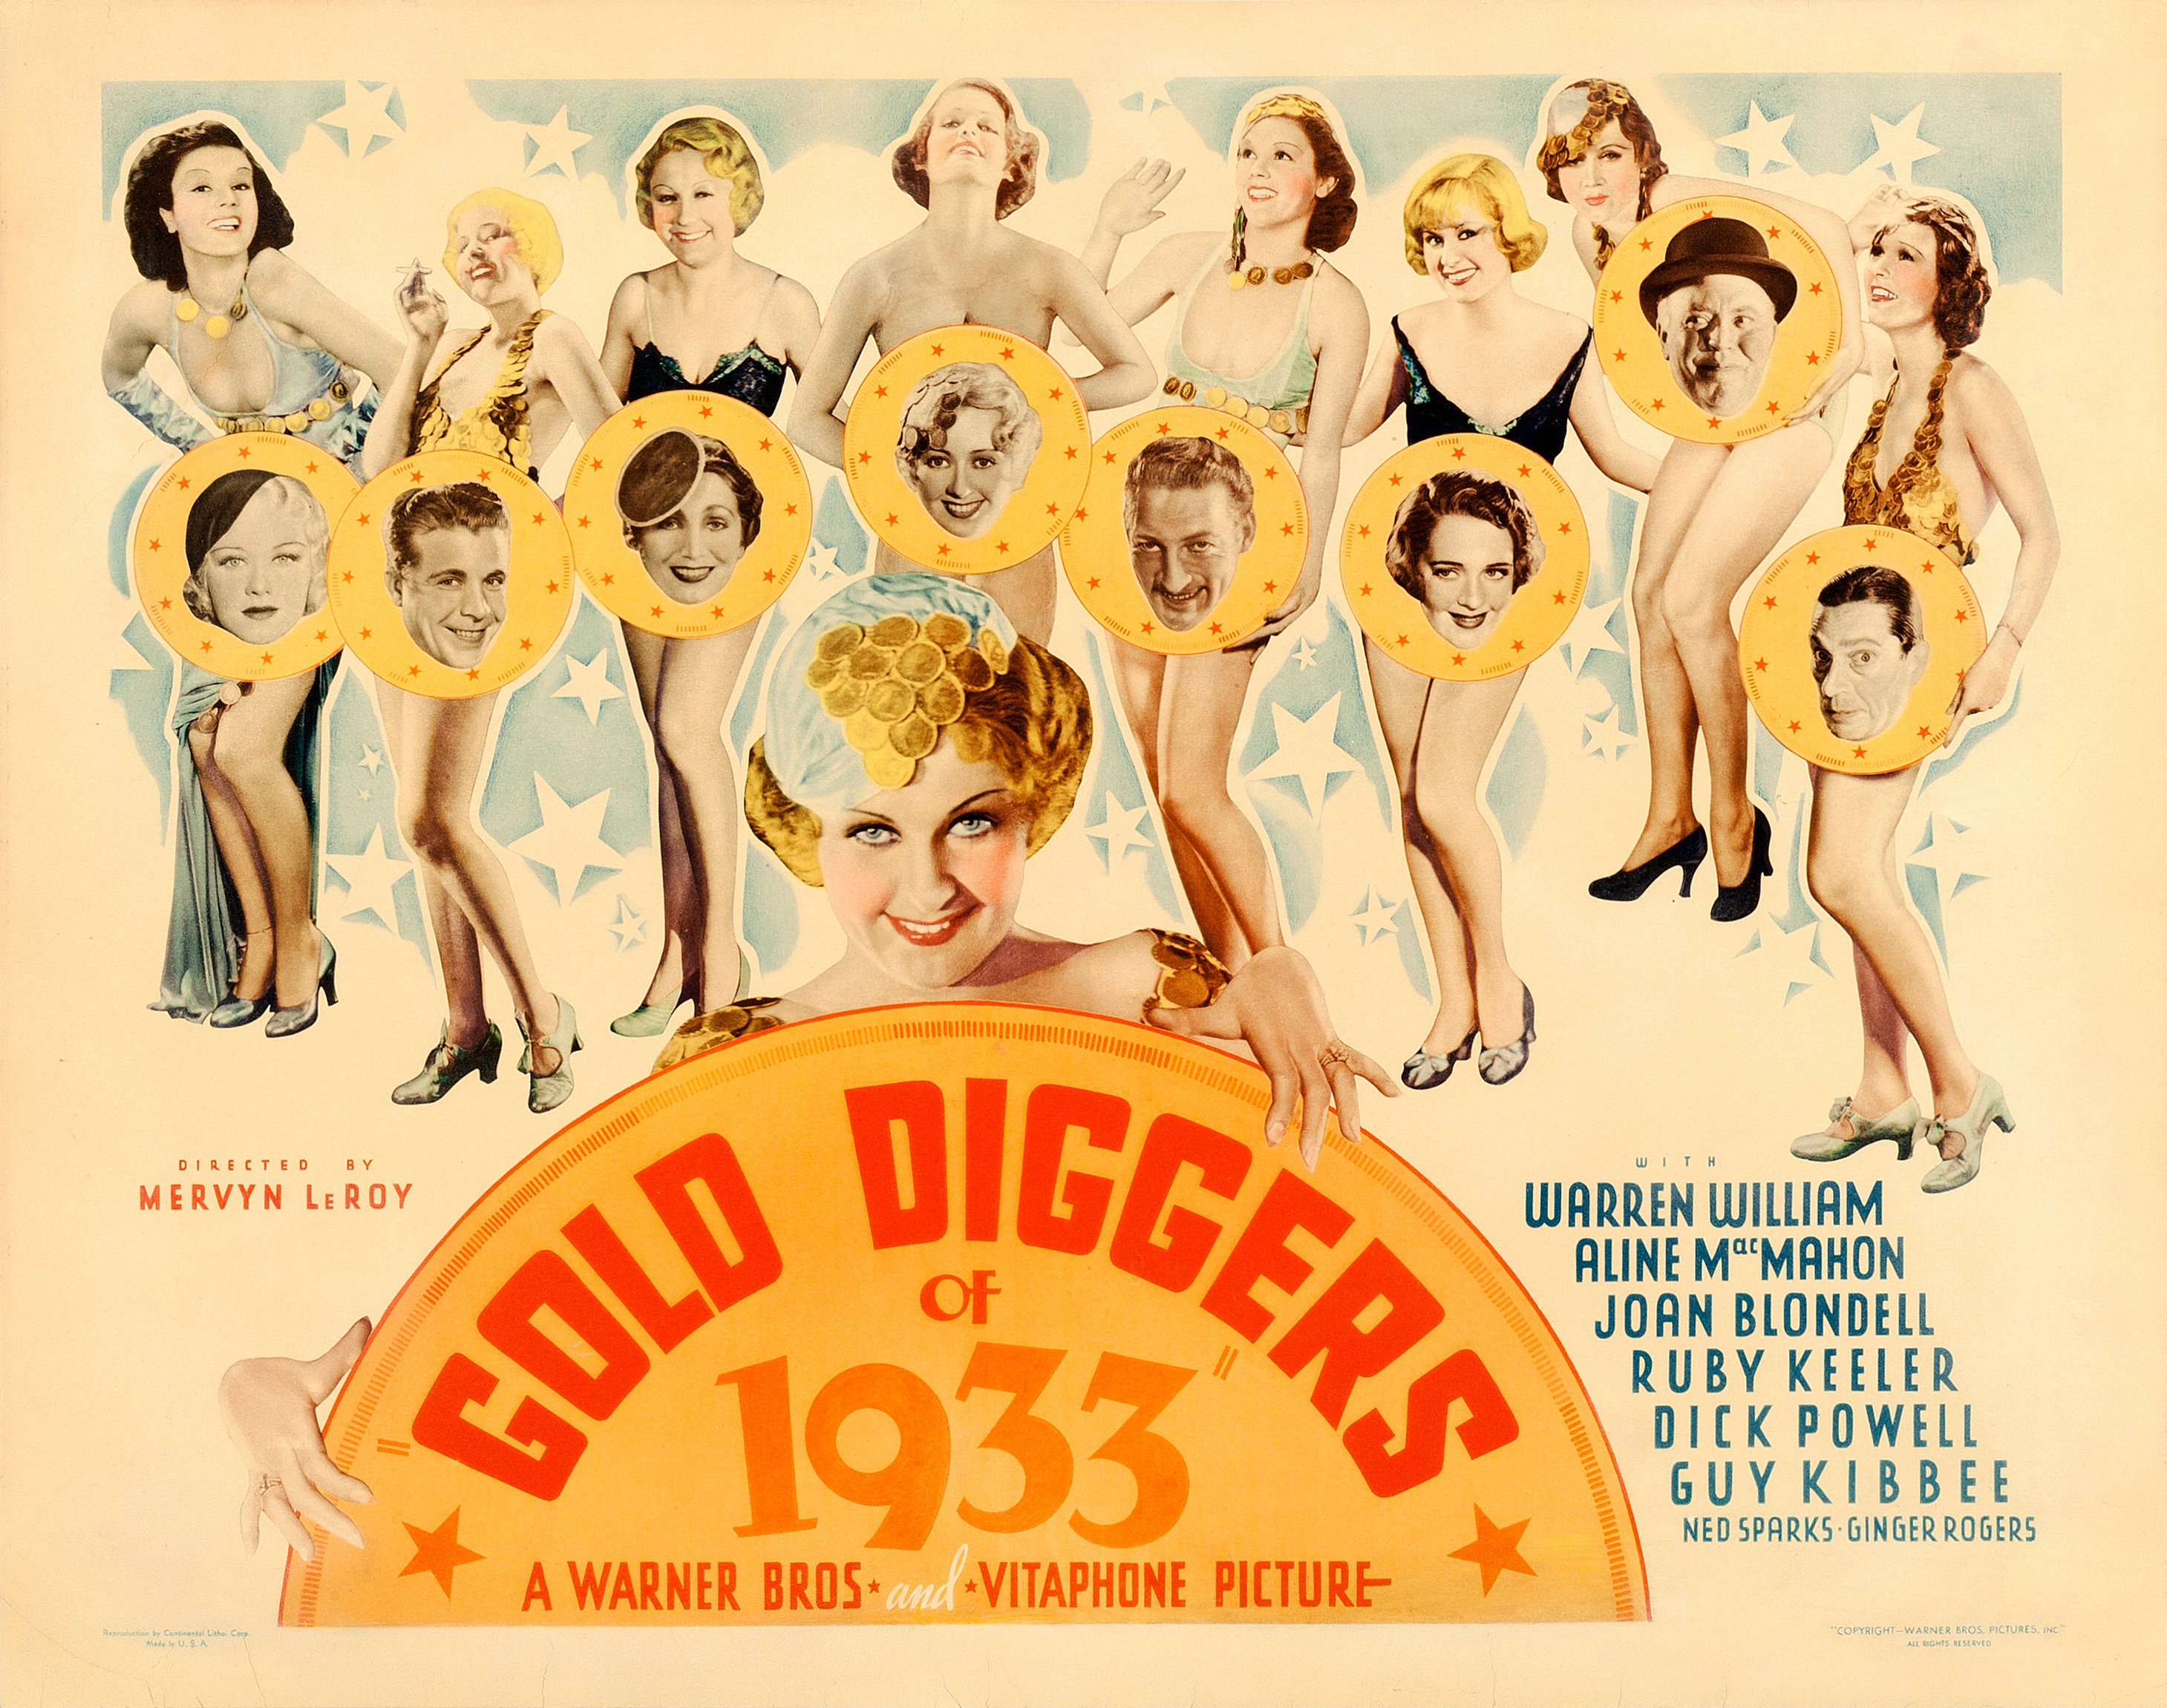 Music, comedy and class: The Immigrant and Gold Diggers of 1933